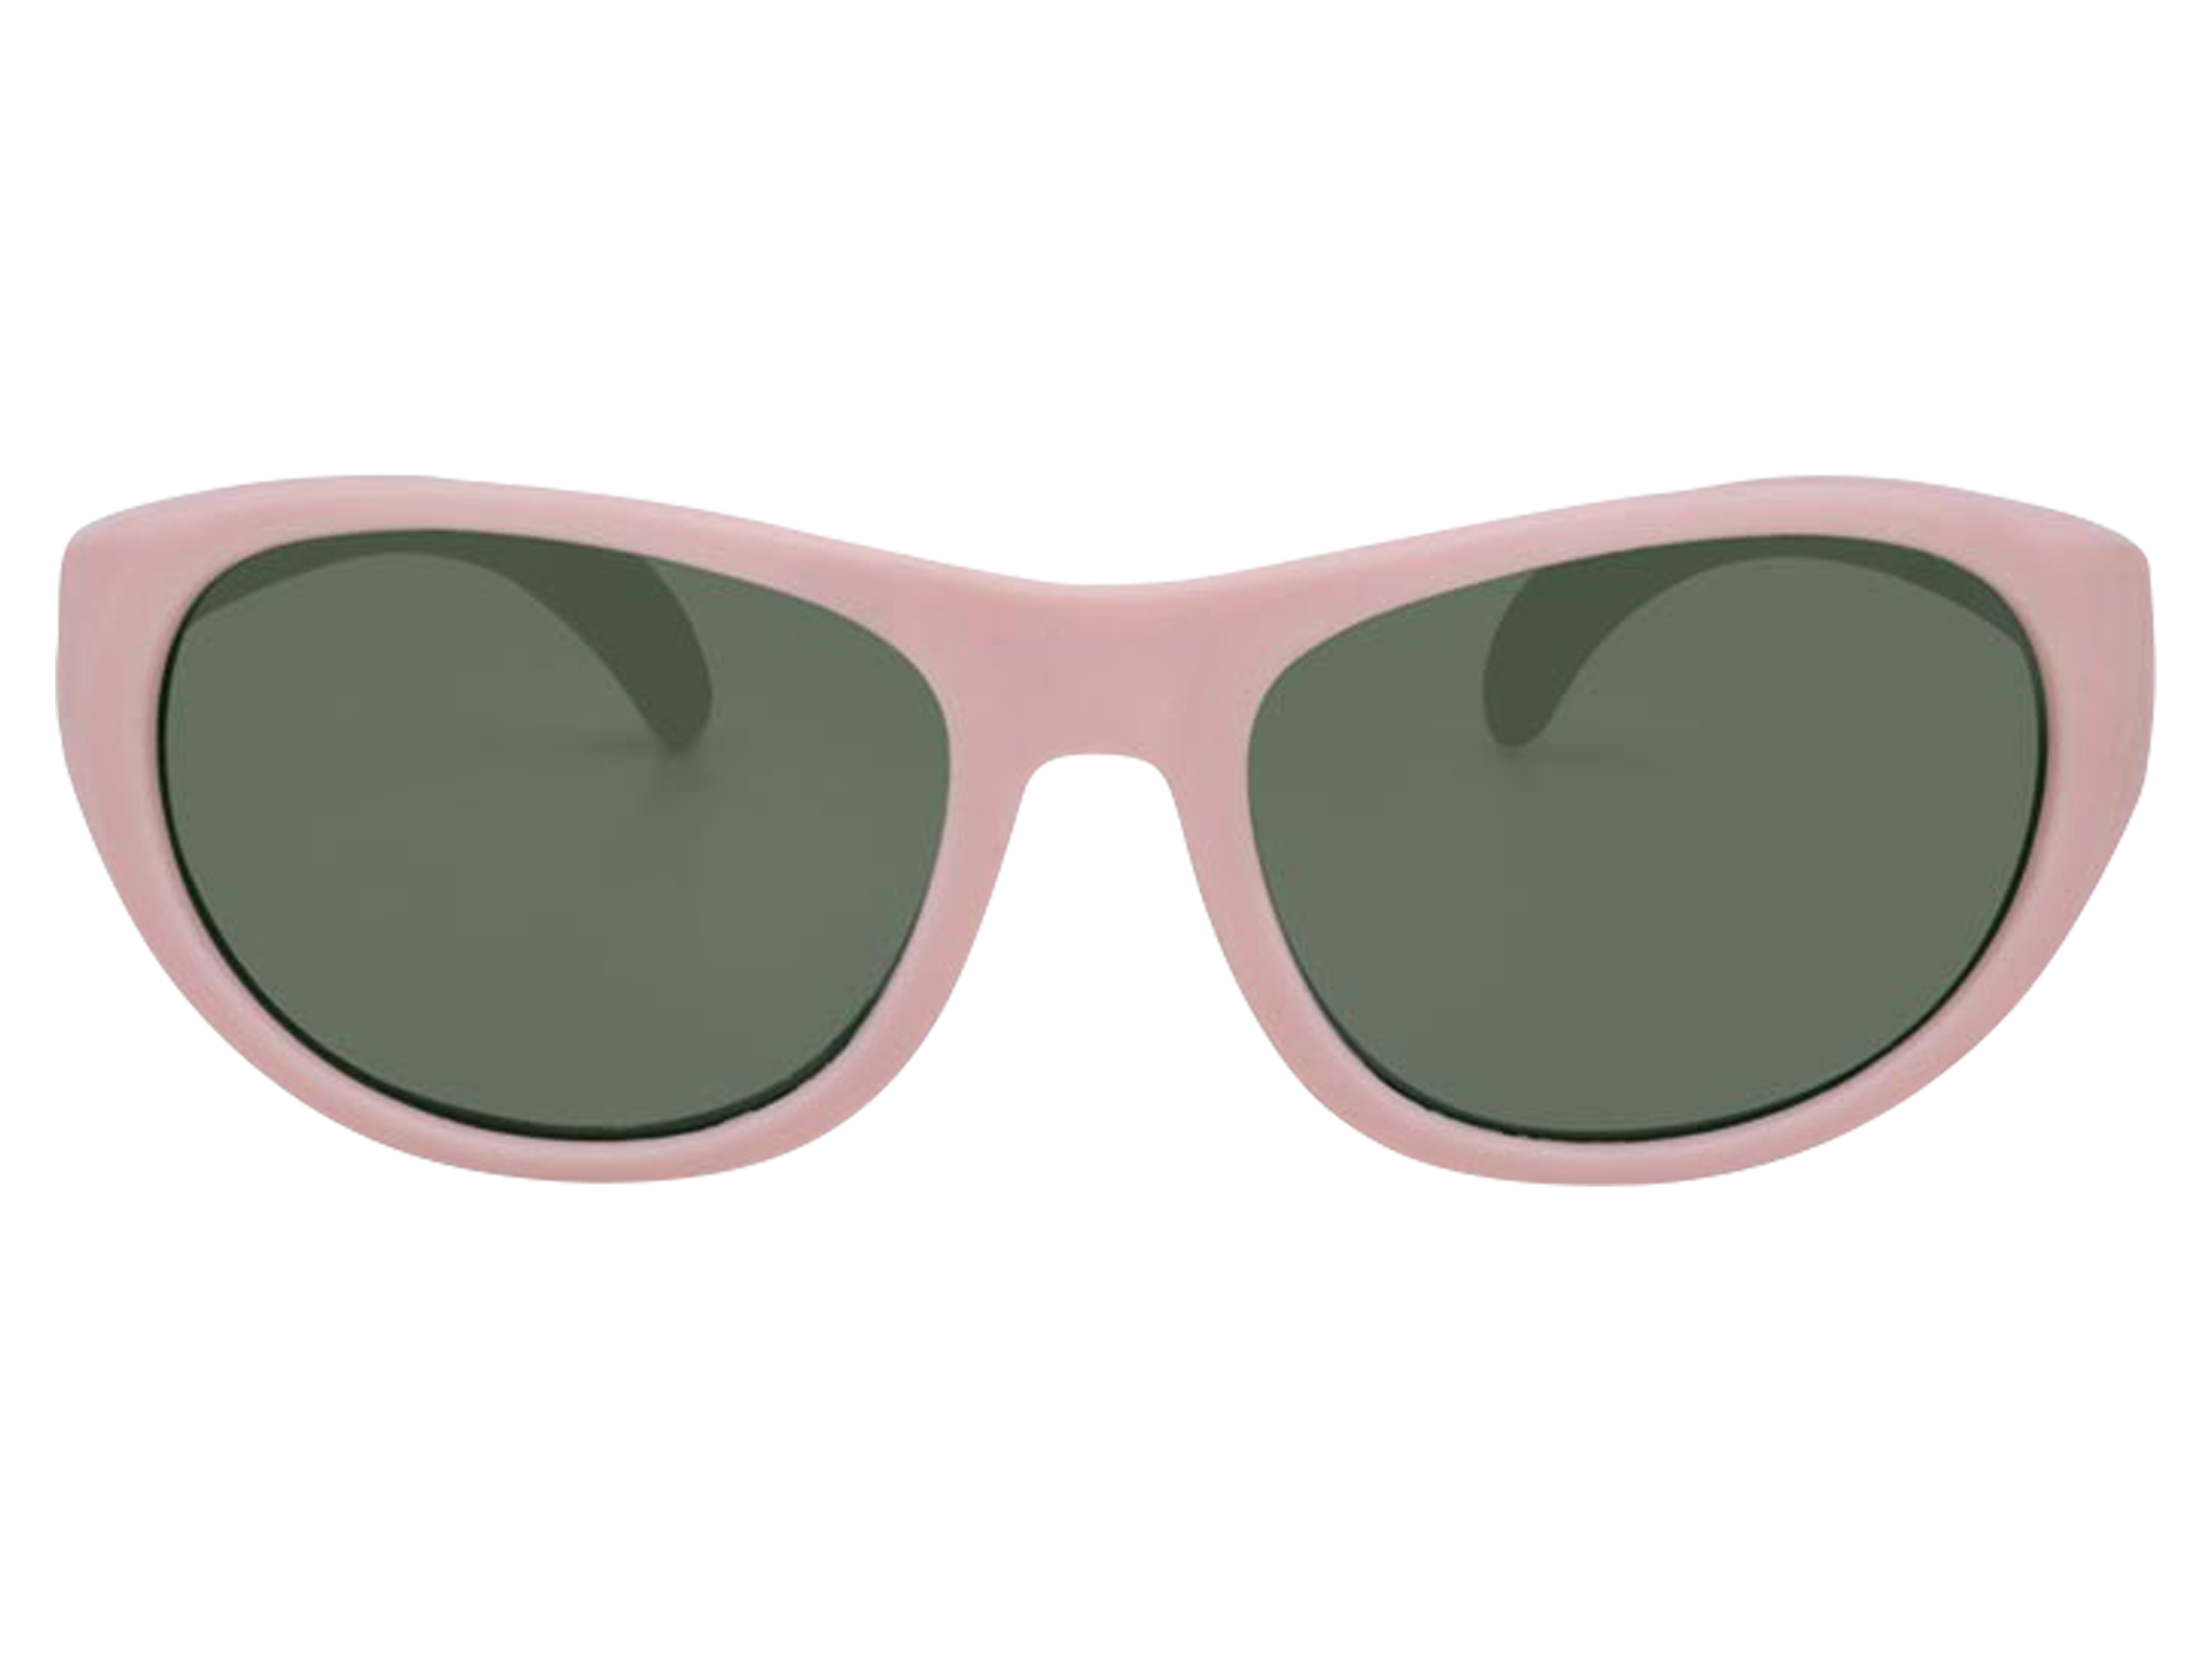 Tootiny ITOOTI Active Sunglasses, Large, Pink